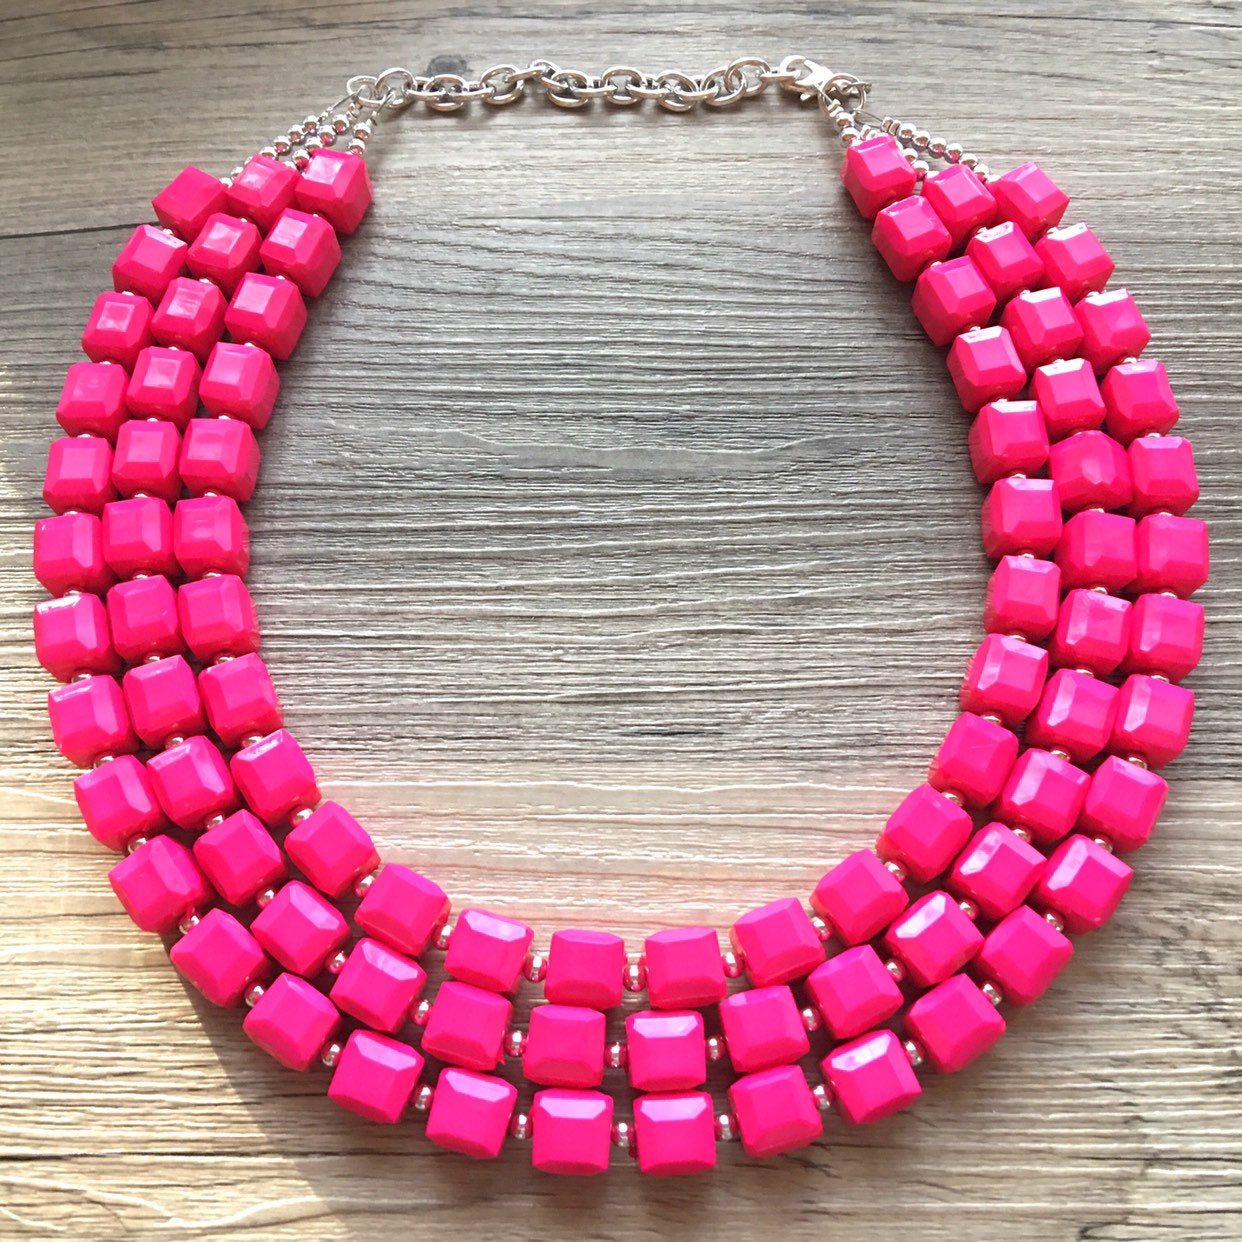 Pink Statement Necklace / Bold Beaded Fuchsia Necklace / Multistrand Pink  Necklace / Handmade Magenta Pink Accessories / Big Pink Necklace - Etsy |  Pink statement necklace, Fuchsia necklace, Pink accessories